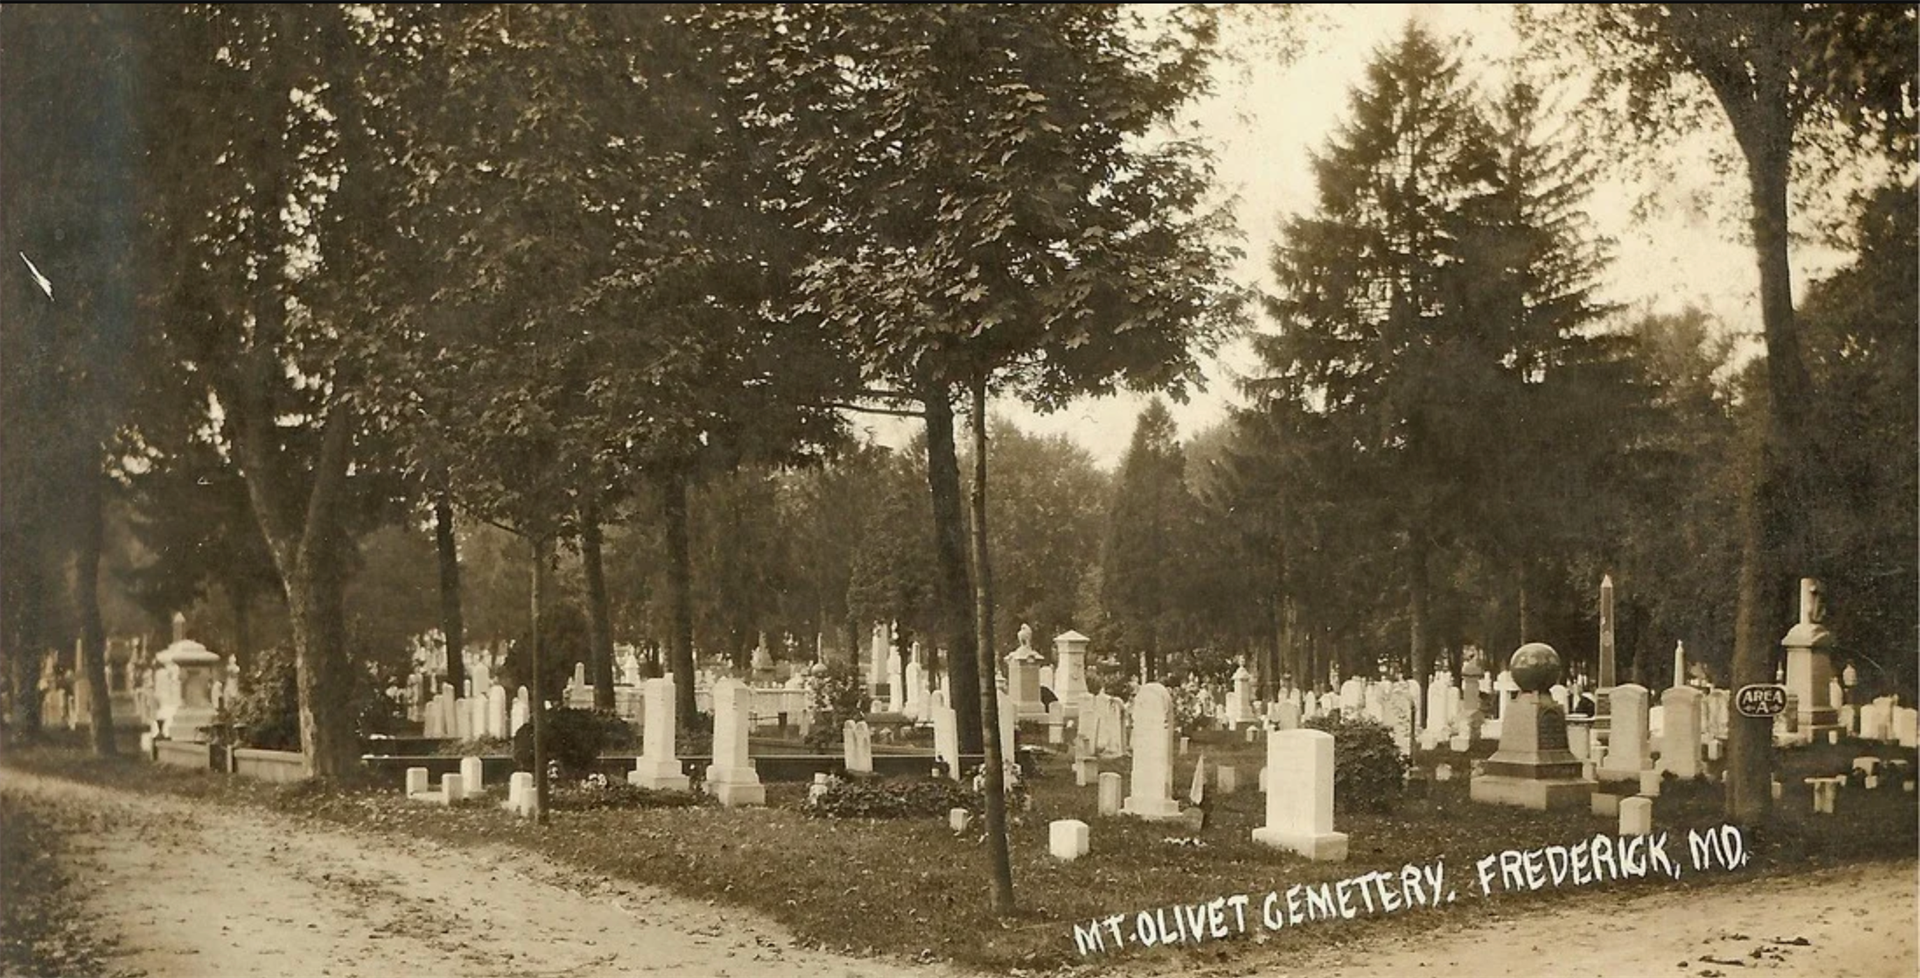 Photograph of cemetery featuring many gravestones and trees.